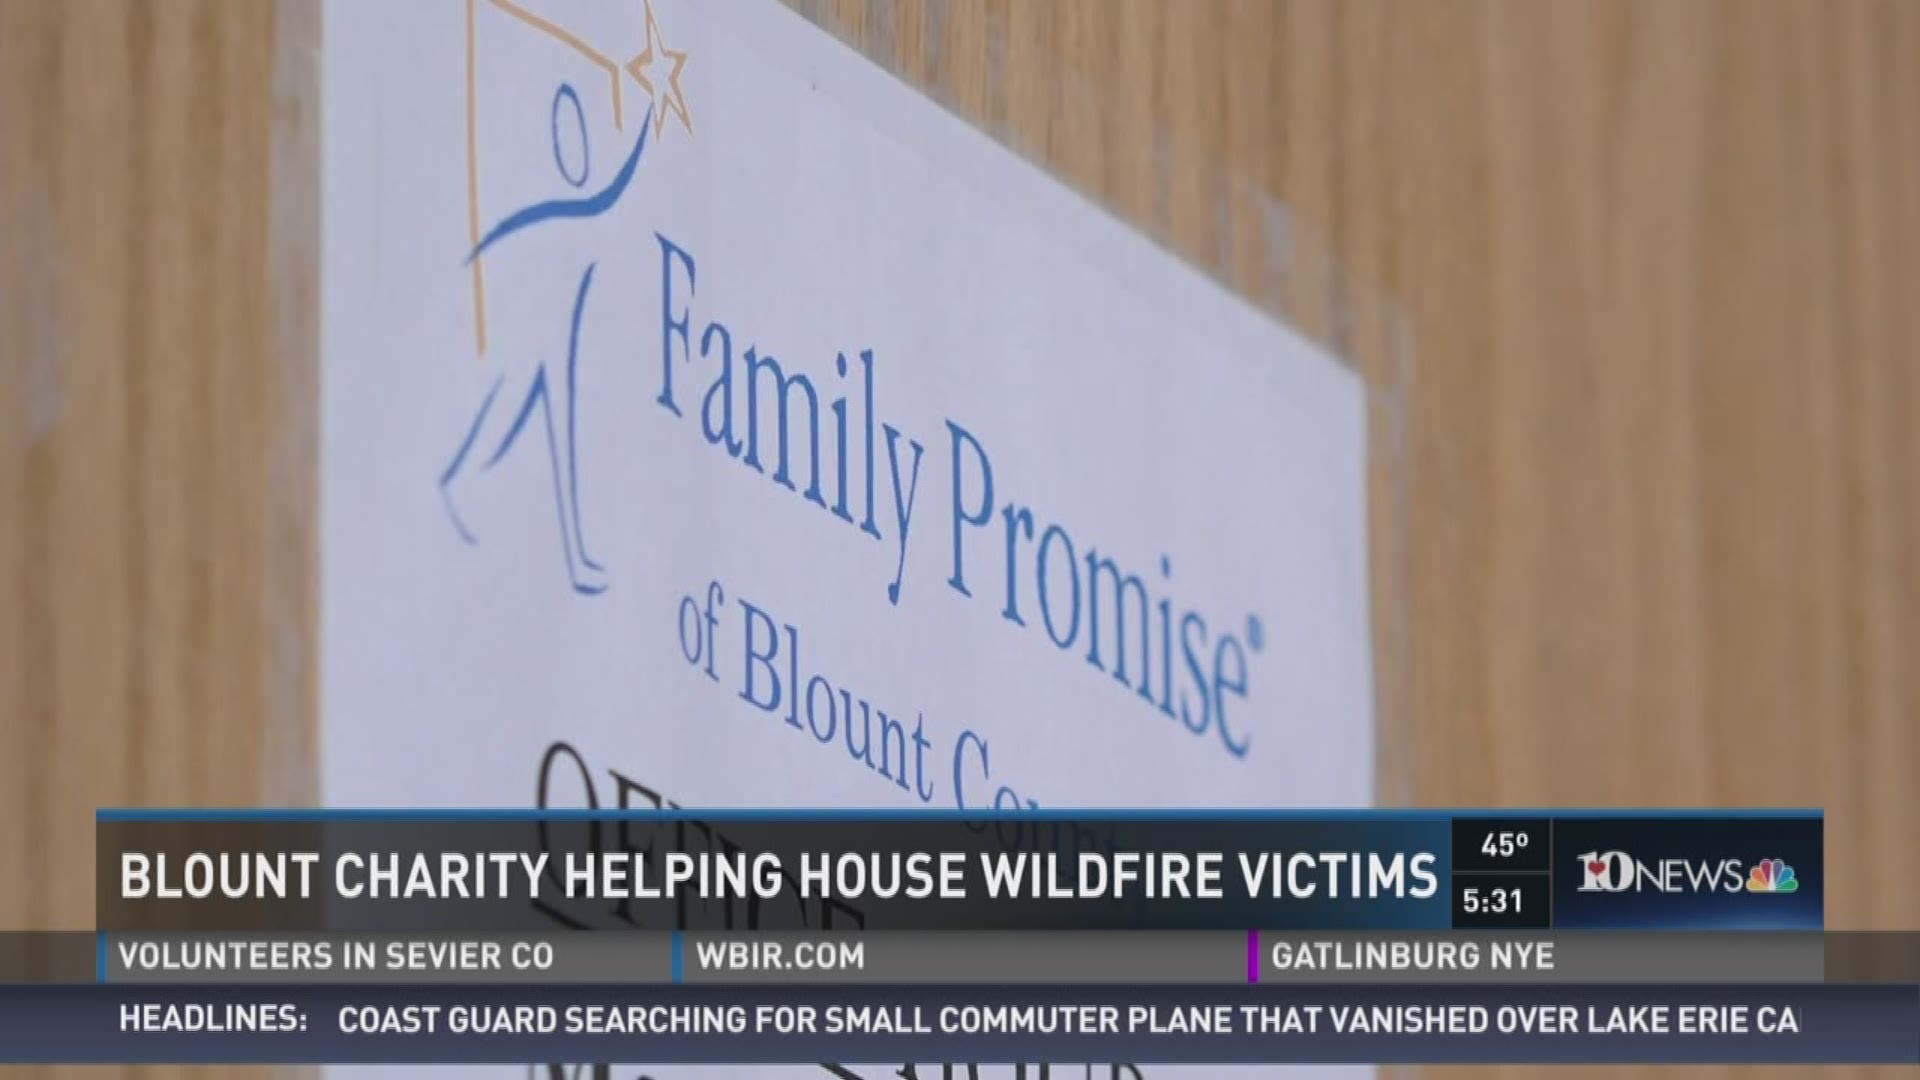 A Blount County non-profit is opening their doors to help house victims of the Sevier County wildfires that have fallen through the cracks of other aid programs.